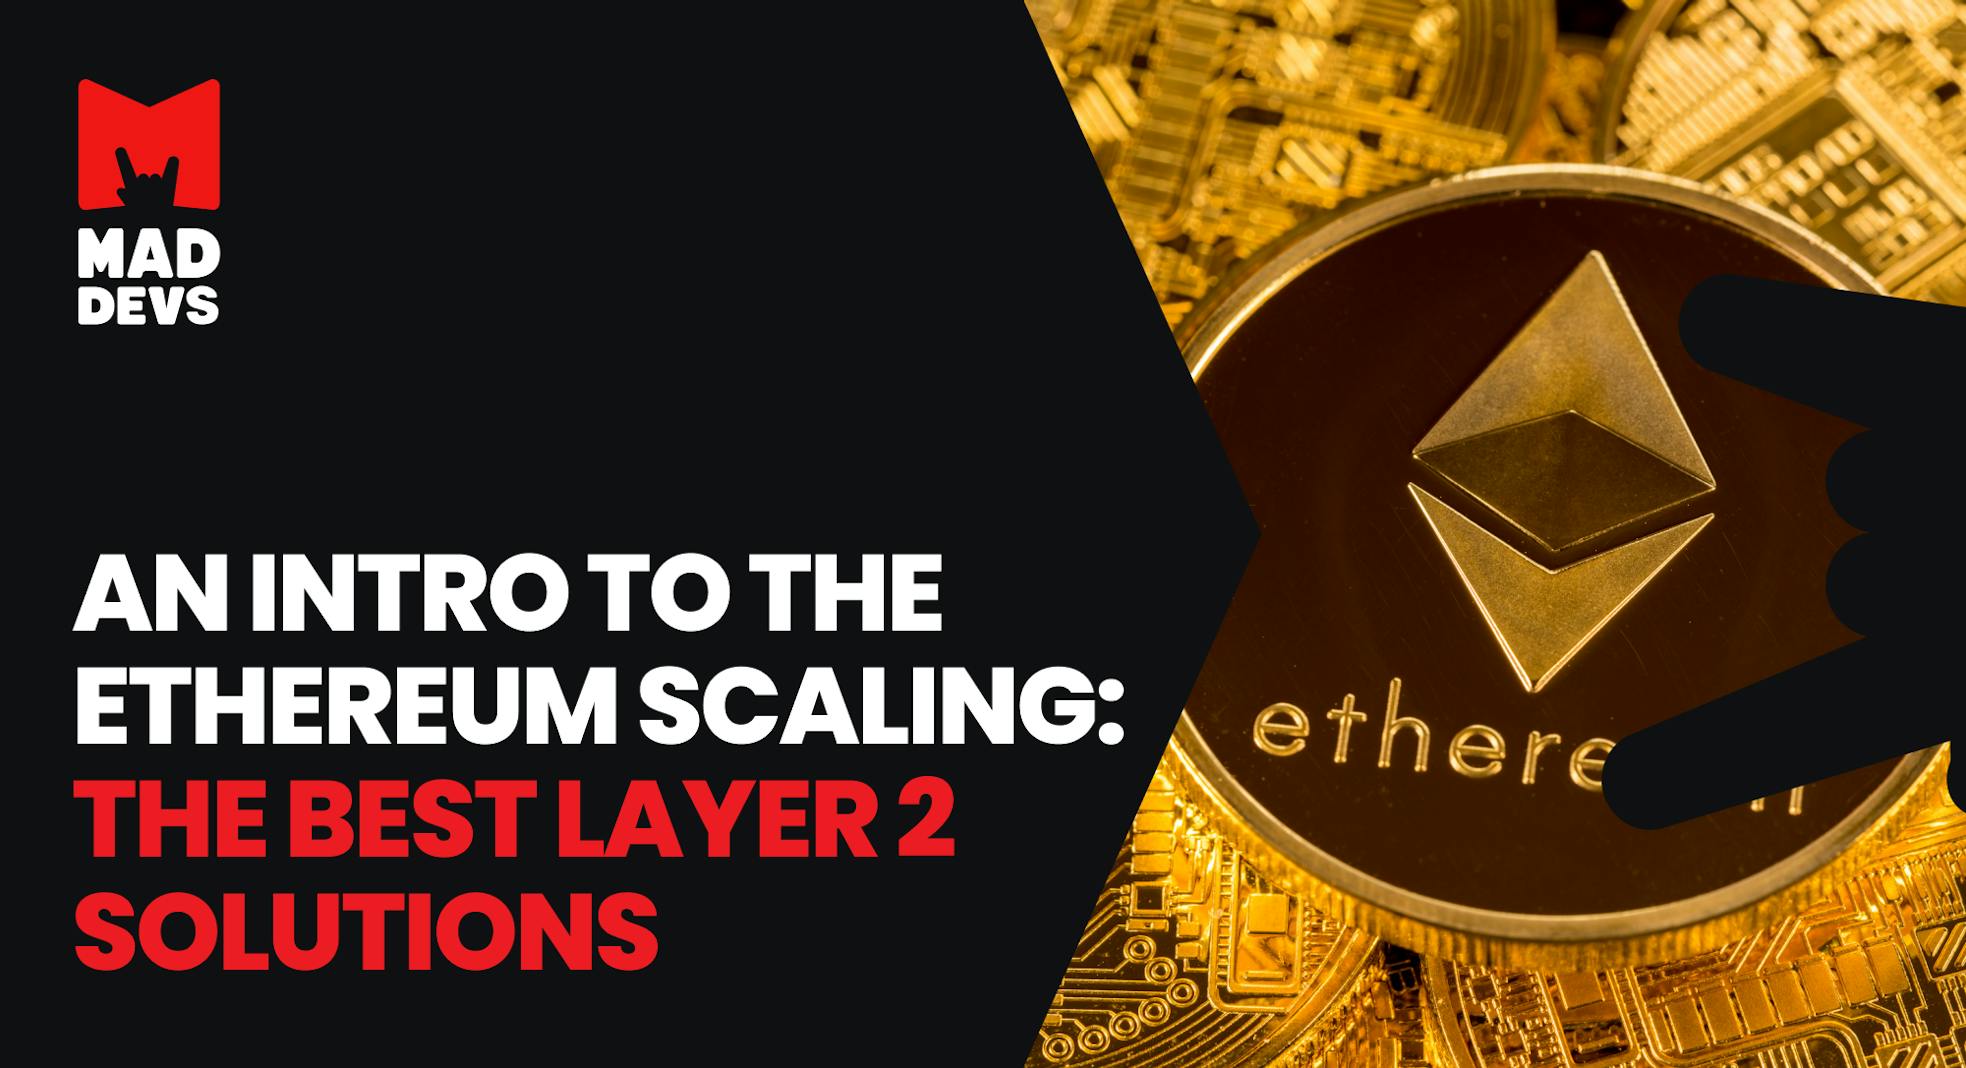 Ethereum Scaling: The Best Layer 2 Solutions